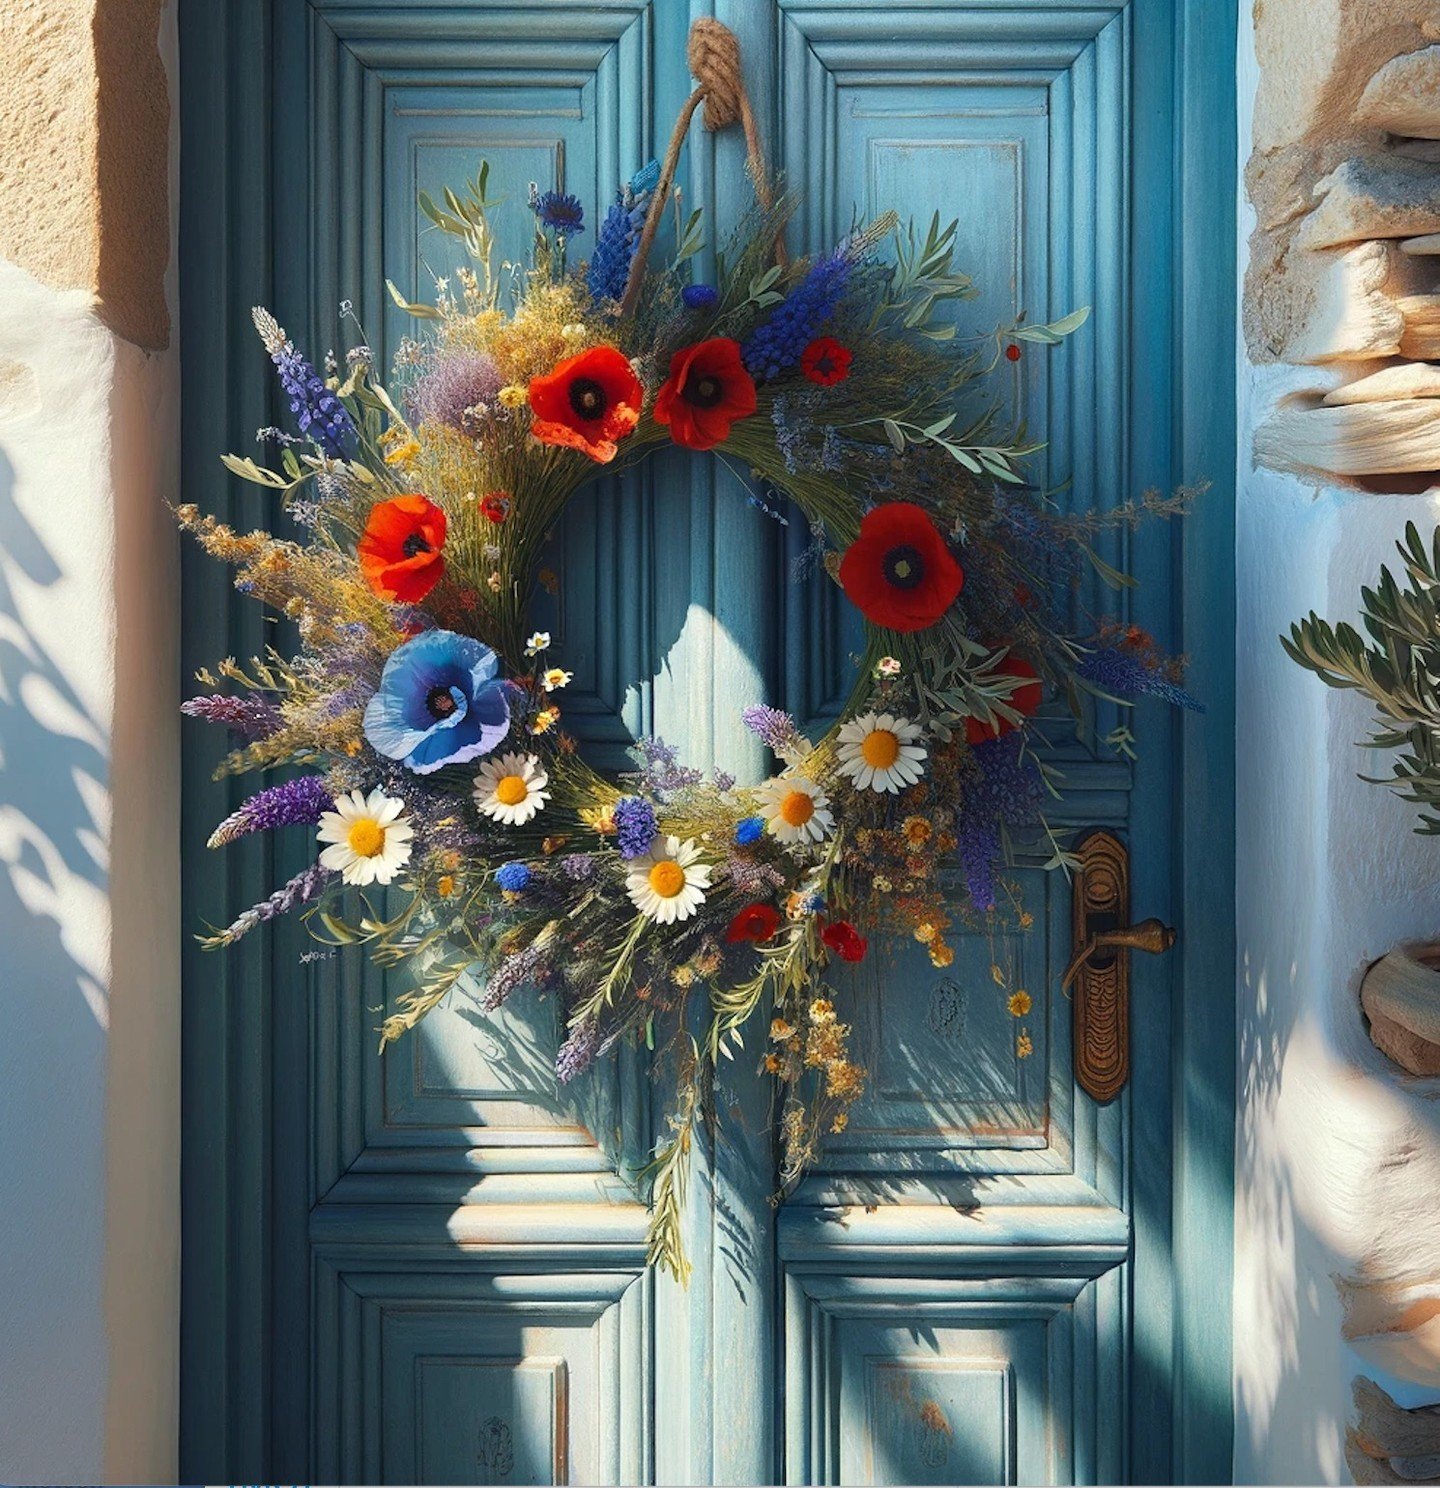 Today in Greece we celebrate the custom of Protomagia, rooted in ancient Greece, as it heralds spring, nature, and flowers. 🌸 Wildflower wreaths, hand-picked and lovingly arranged, grace the doors of many homes, welcoming the bounty of nature. 🌿 Th